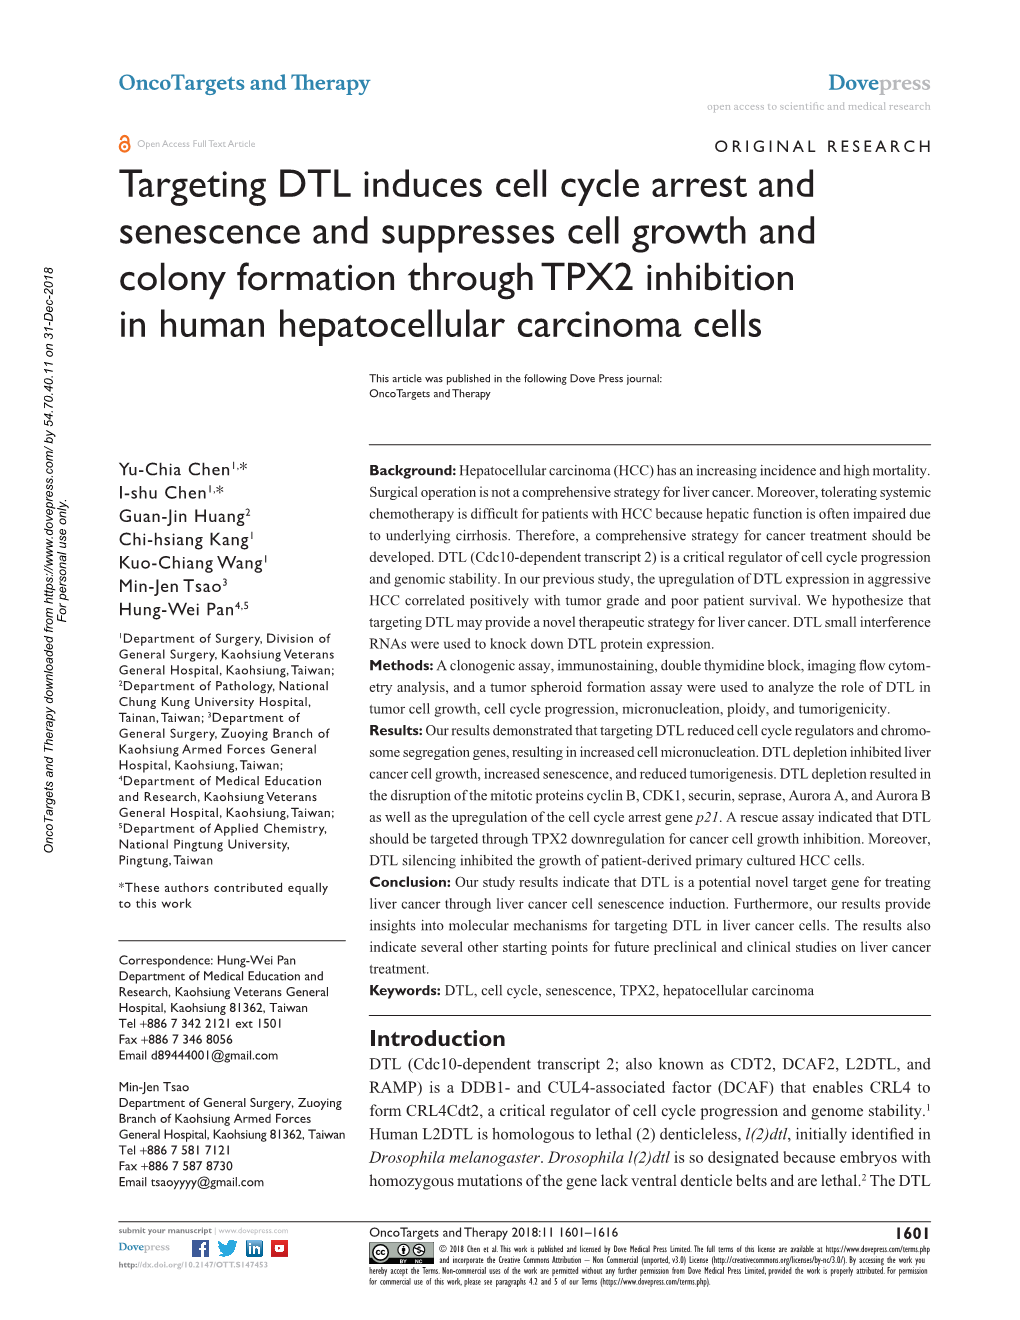 Targeting DTL Induces Cell Cycle Arrest and Senescence and Suppresses Cell Growth and Colony Formation Through TPX2 Inhibition in Human Hepatocellular Carcinoma Cells